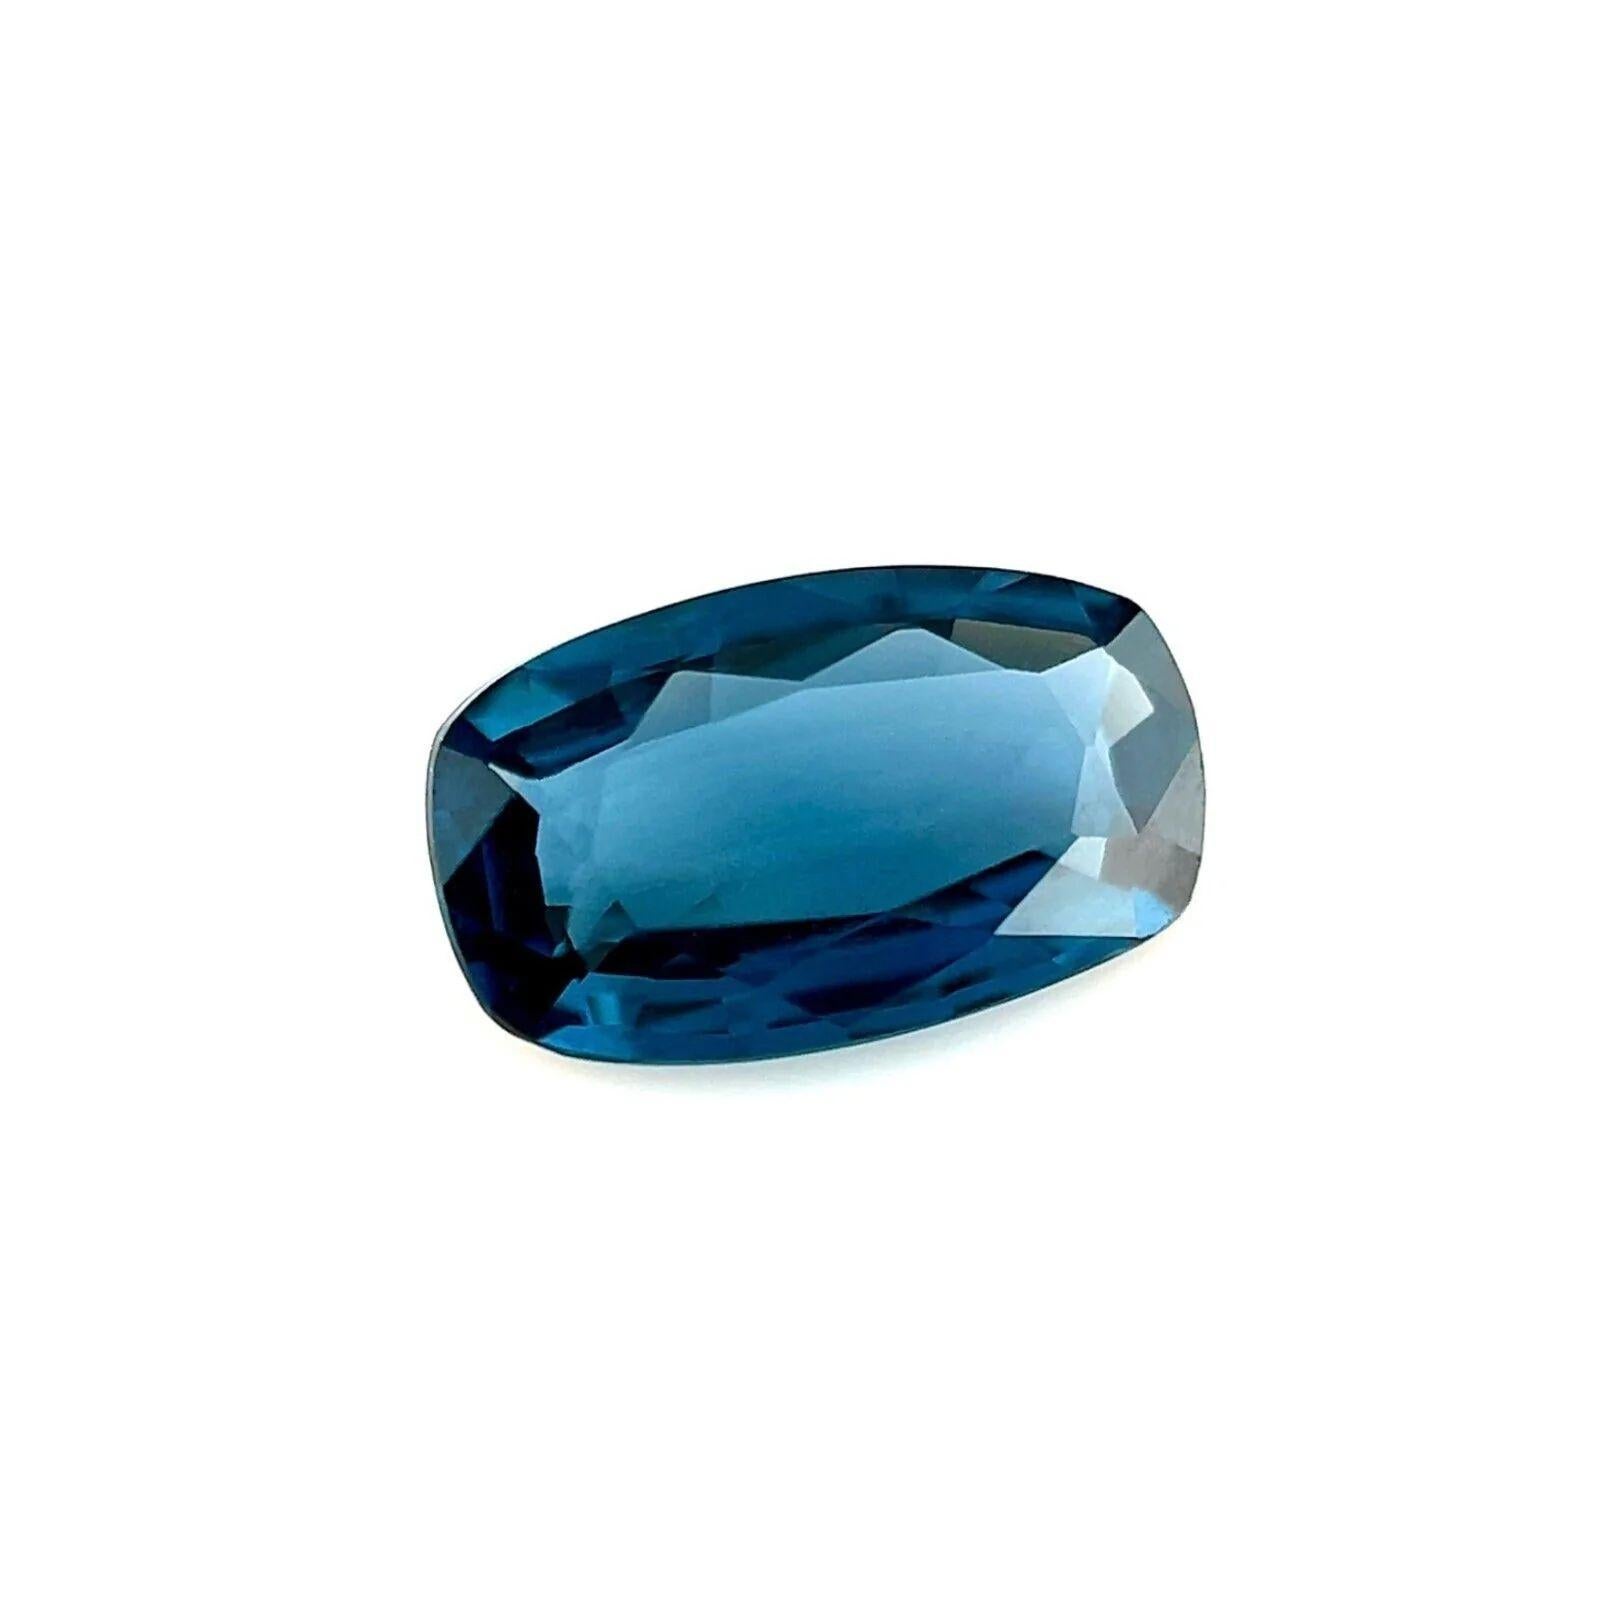 Fine Deep Blue Natural Spinel 1.04ct Cushion Cut 8.4x4mm Loose Rare Gem

Natural Vivid Blue Spinel Gemstone.
Beautiful natural 1.04 Carat spinel with a vivid blue colour and excellent clarity.
Very clean stone, also has an excellent cushion cut